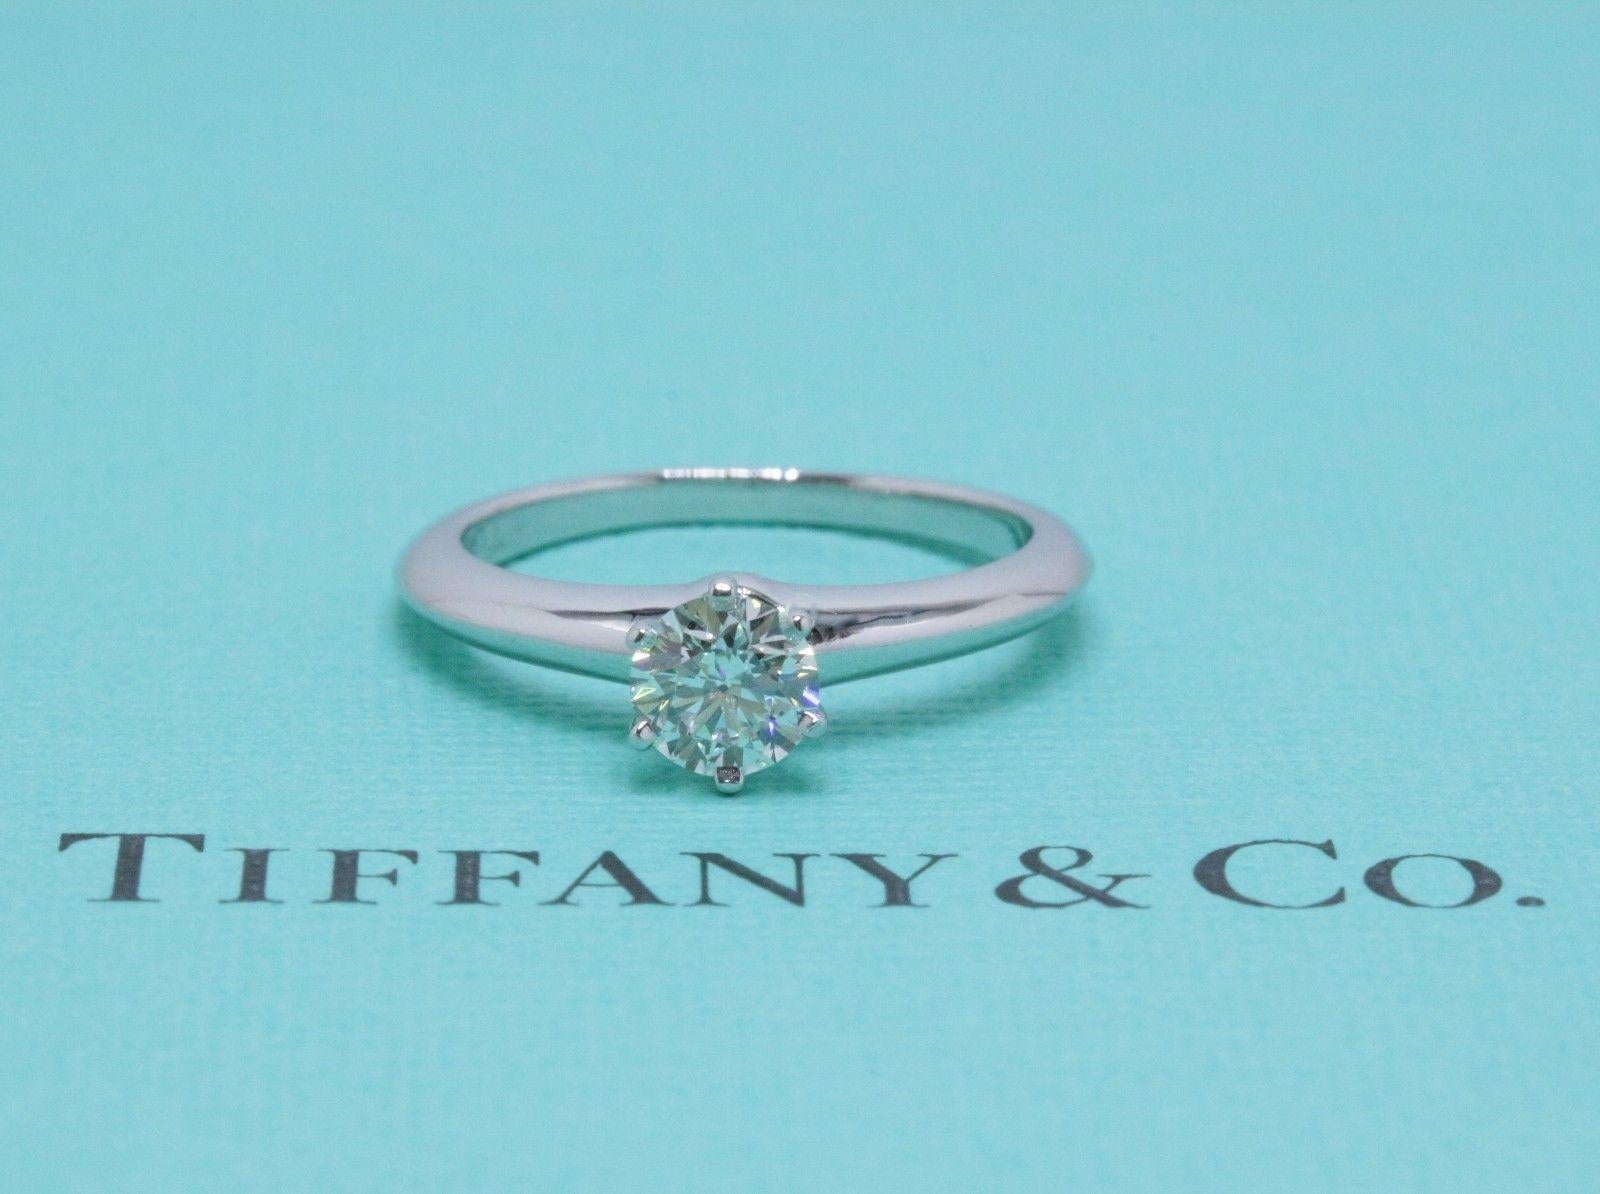 Tiffany & Co.
Style:  Tiffany 6-Prong  Classic Solitaire
Serial Number:  27658237/L10180268
Metal:  Platinum PT950
Ring Size:  6.5 - Sizable
Total Carat Weight: 0.58 TCW
Diamond Shape:  Round Brilliant Diamond 0.58 CTS 
Color & Clarity: I /